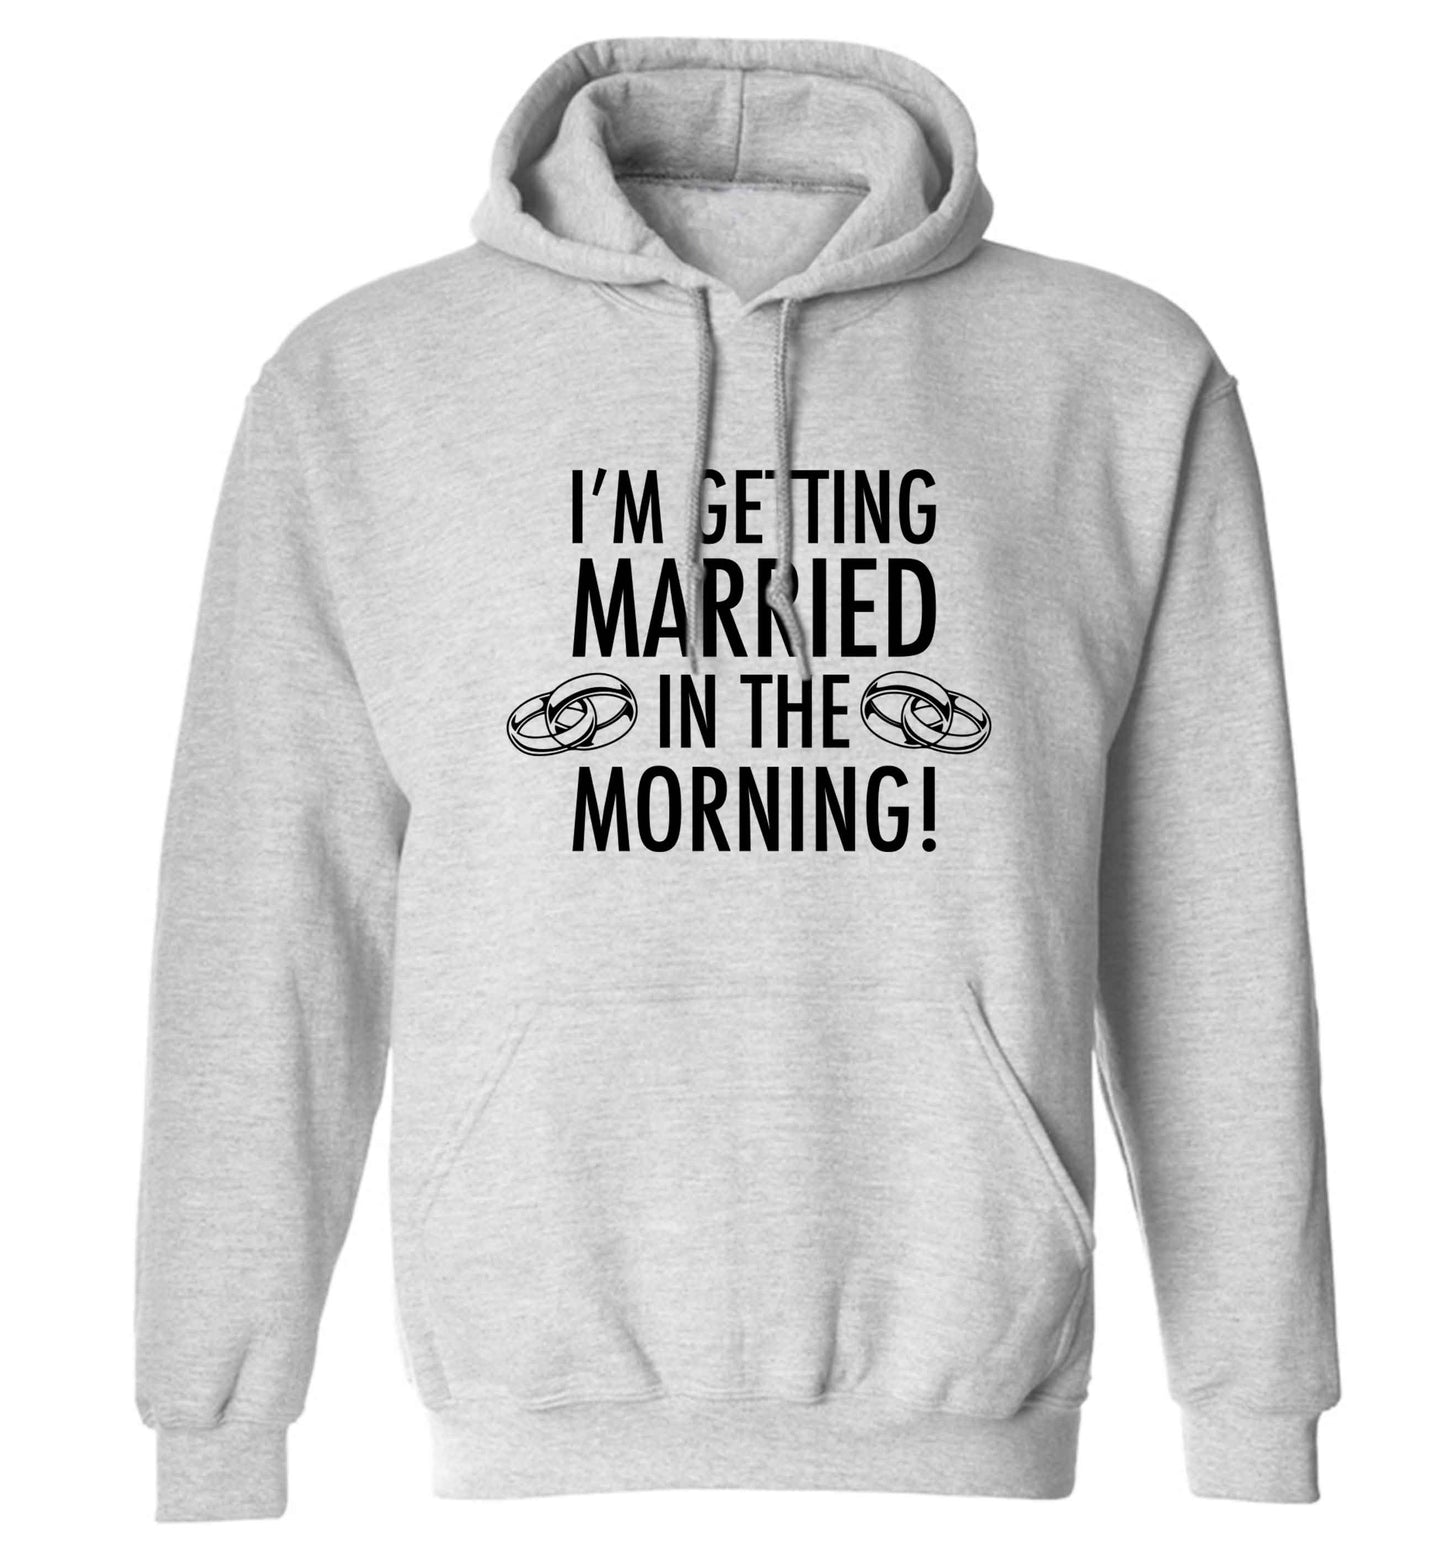 I'm getting married in the morning! adults unisex grey hoodie 2XL